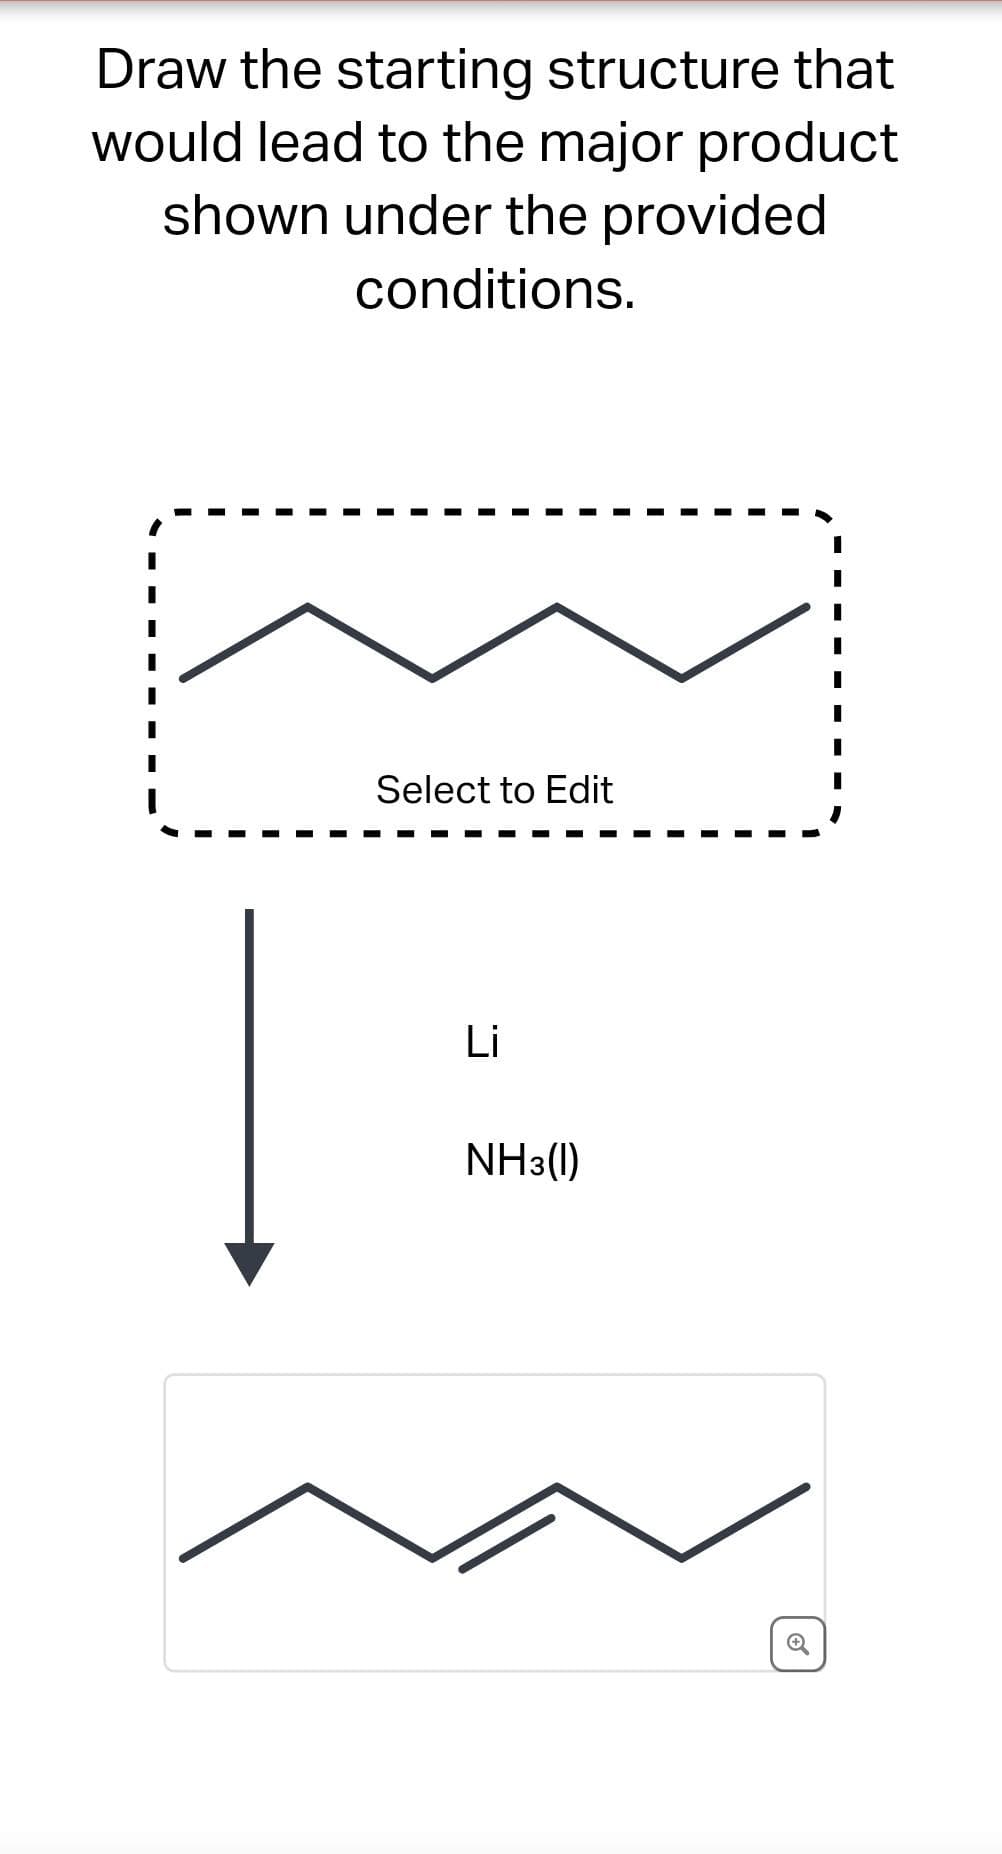 Draw the starting structure that
would lead to the major product
shown under the provided
conditions.
Select to Edit
Li
NH3(1)